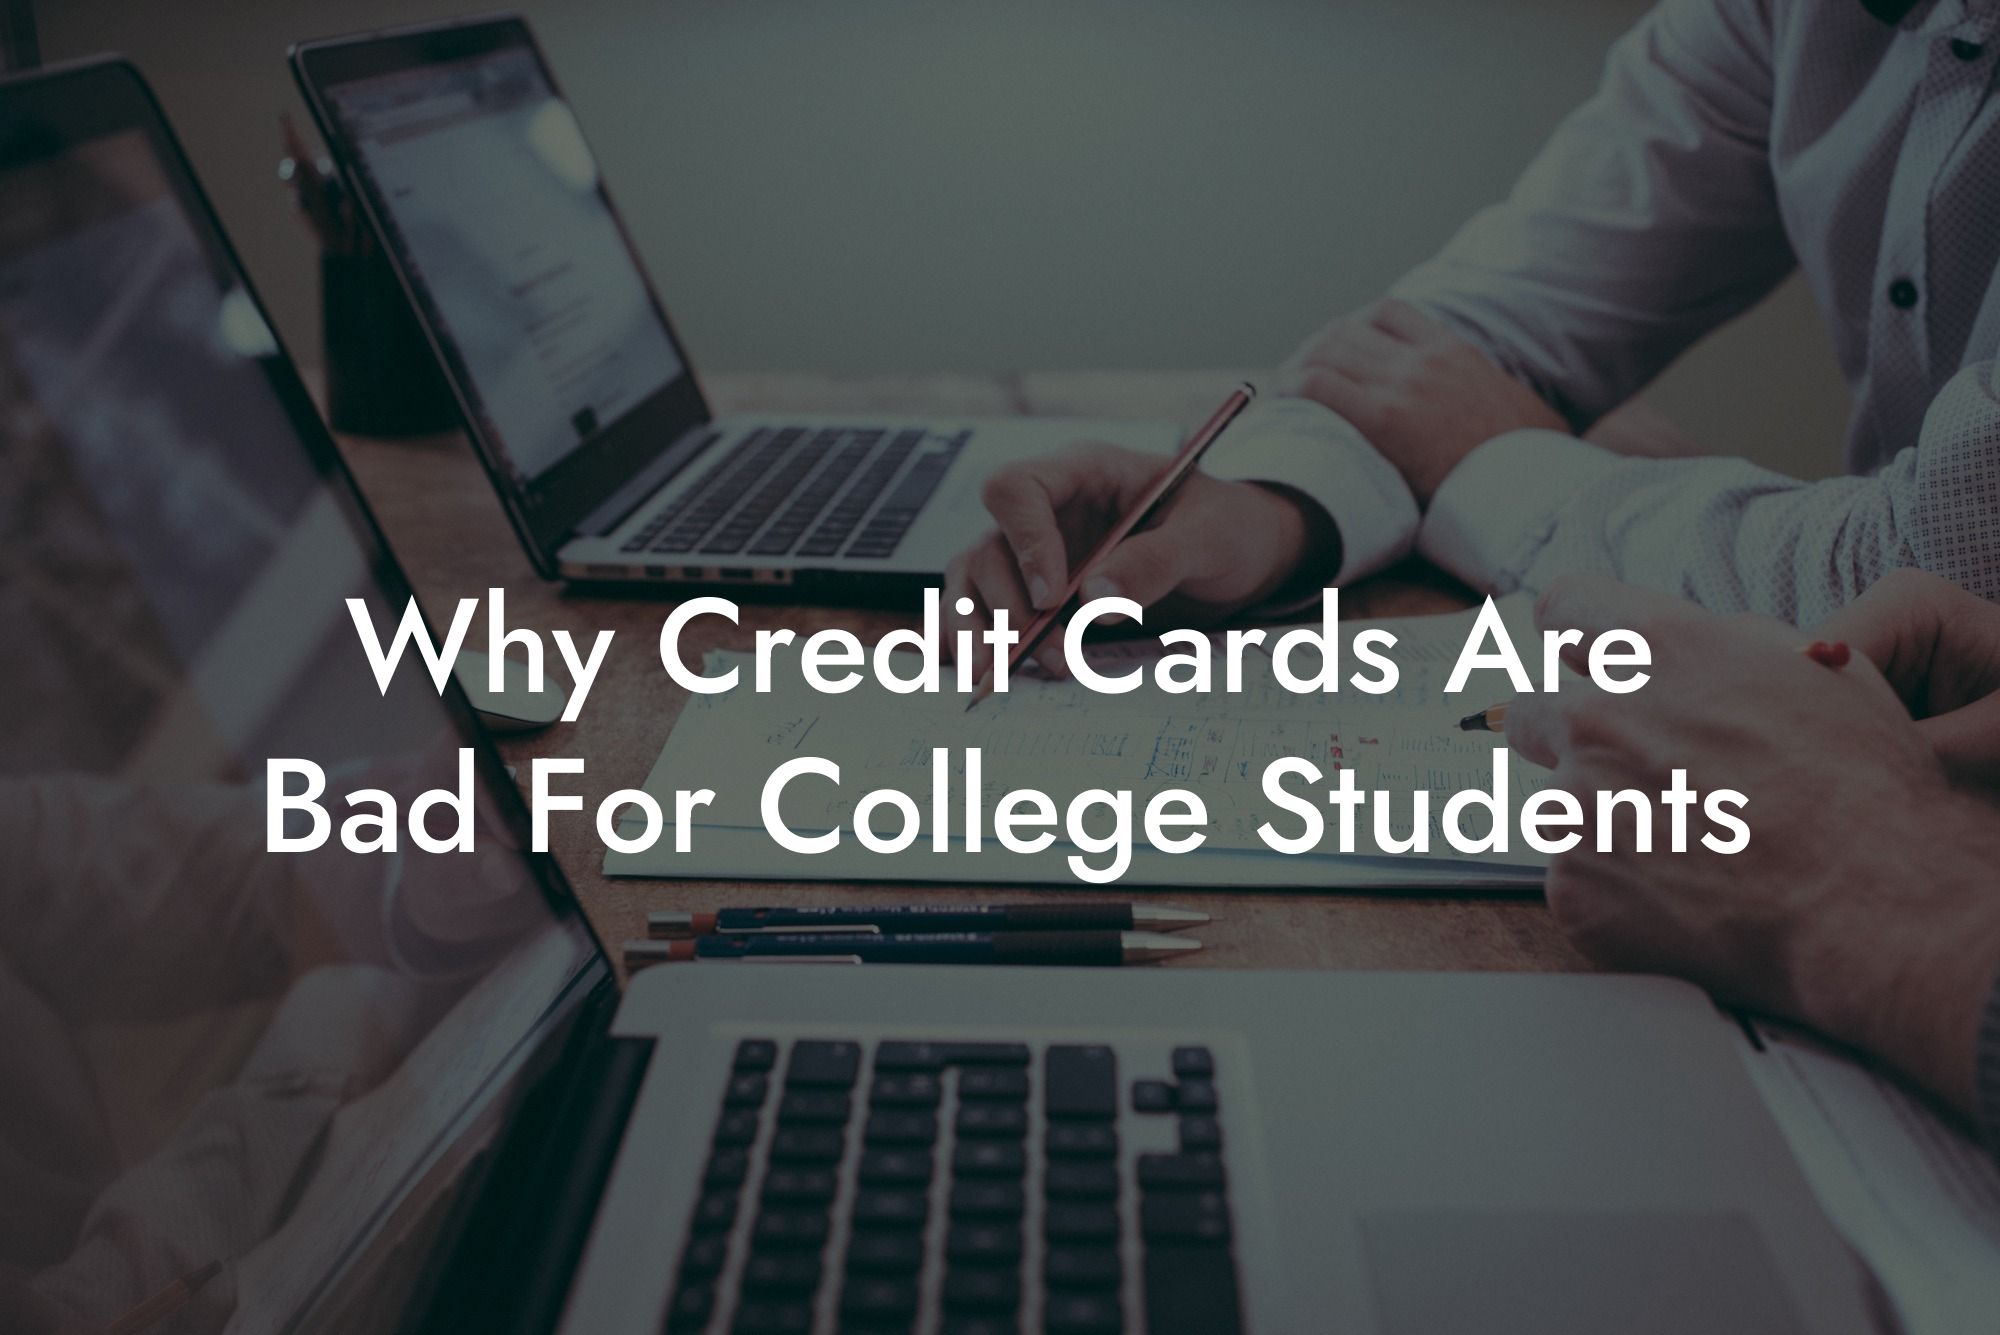 Why Credit Cards Are Bad For College Students